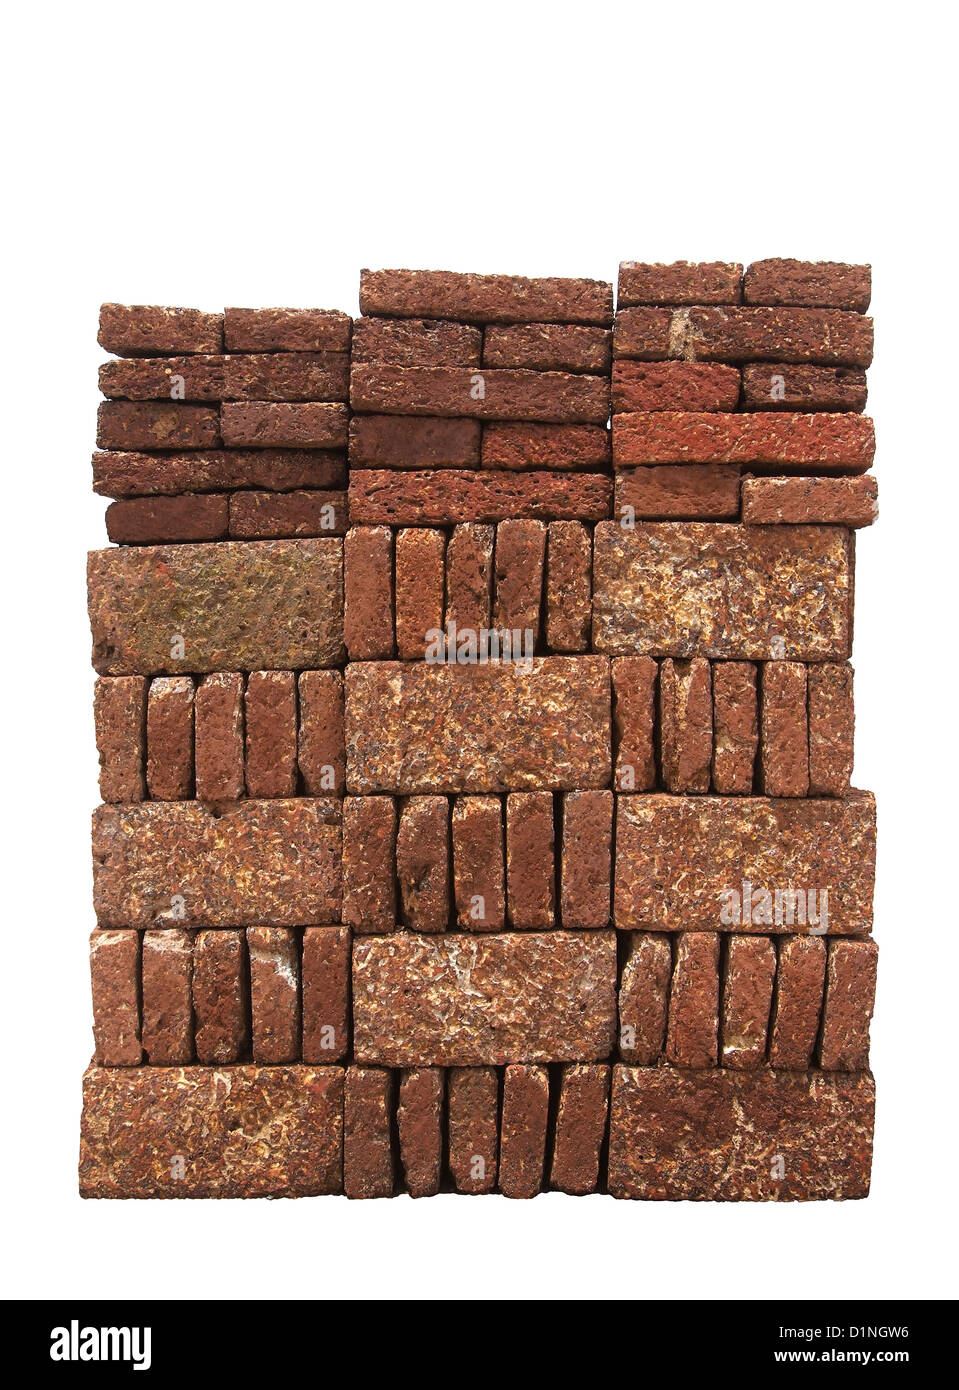 Red-brown Laterite bricks isolated on white background. Stock Photo